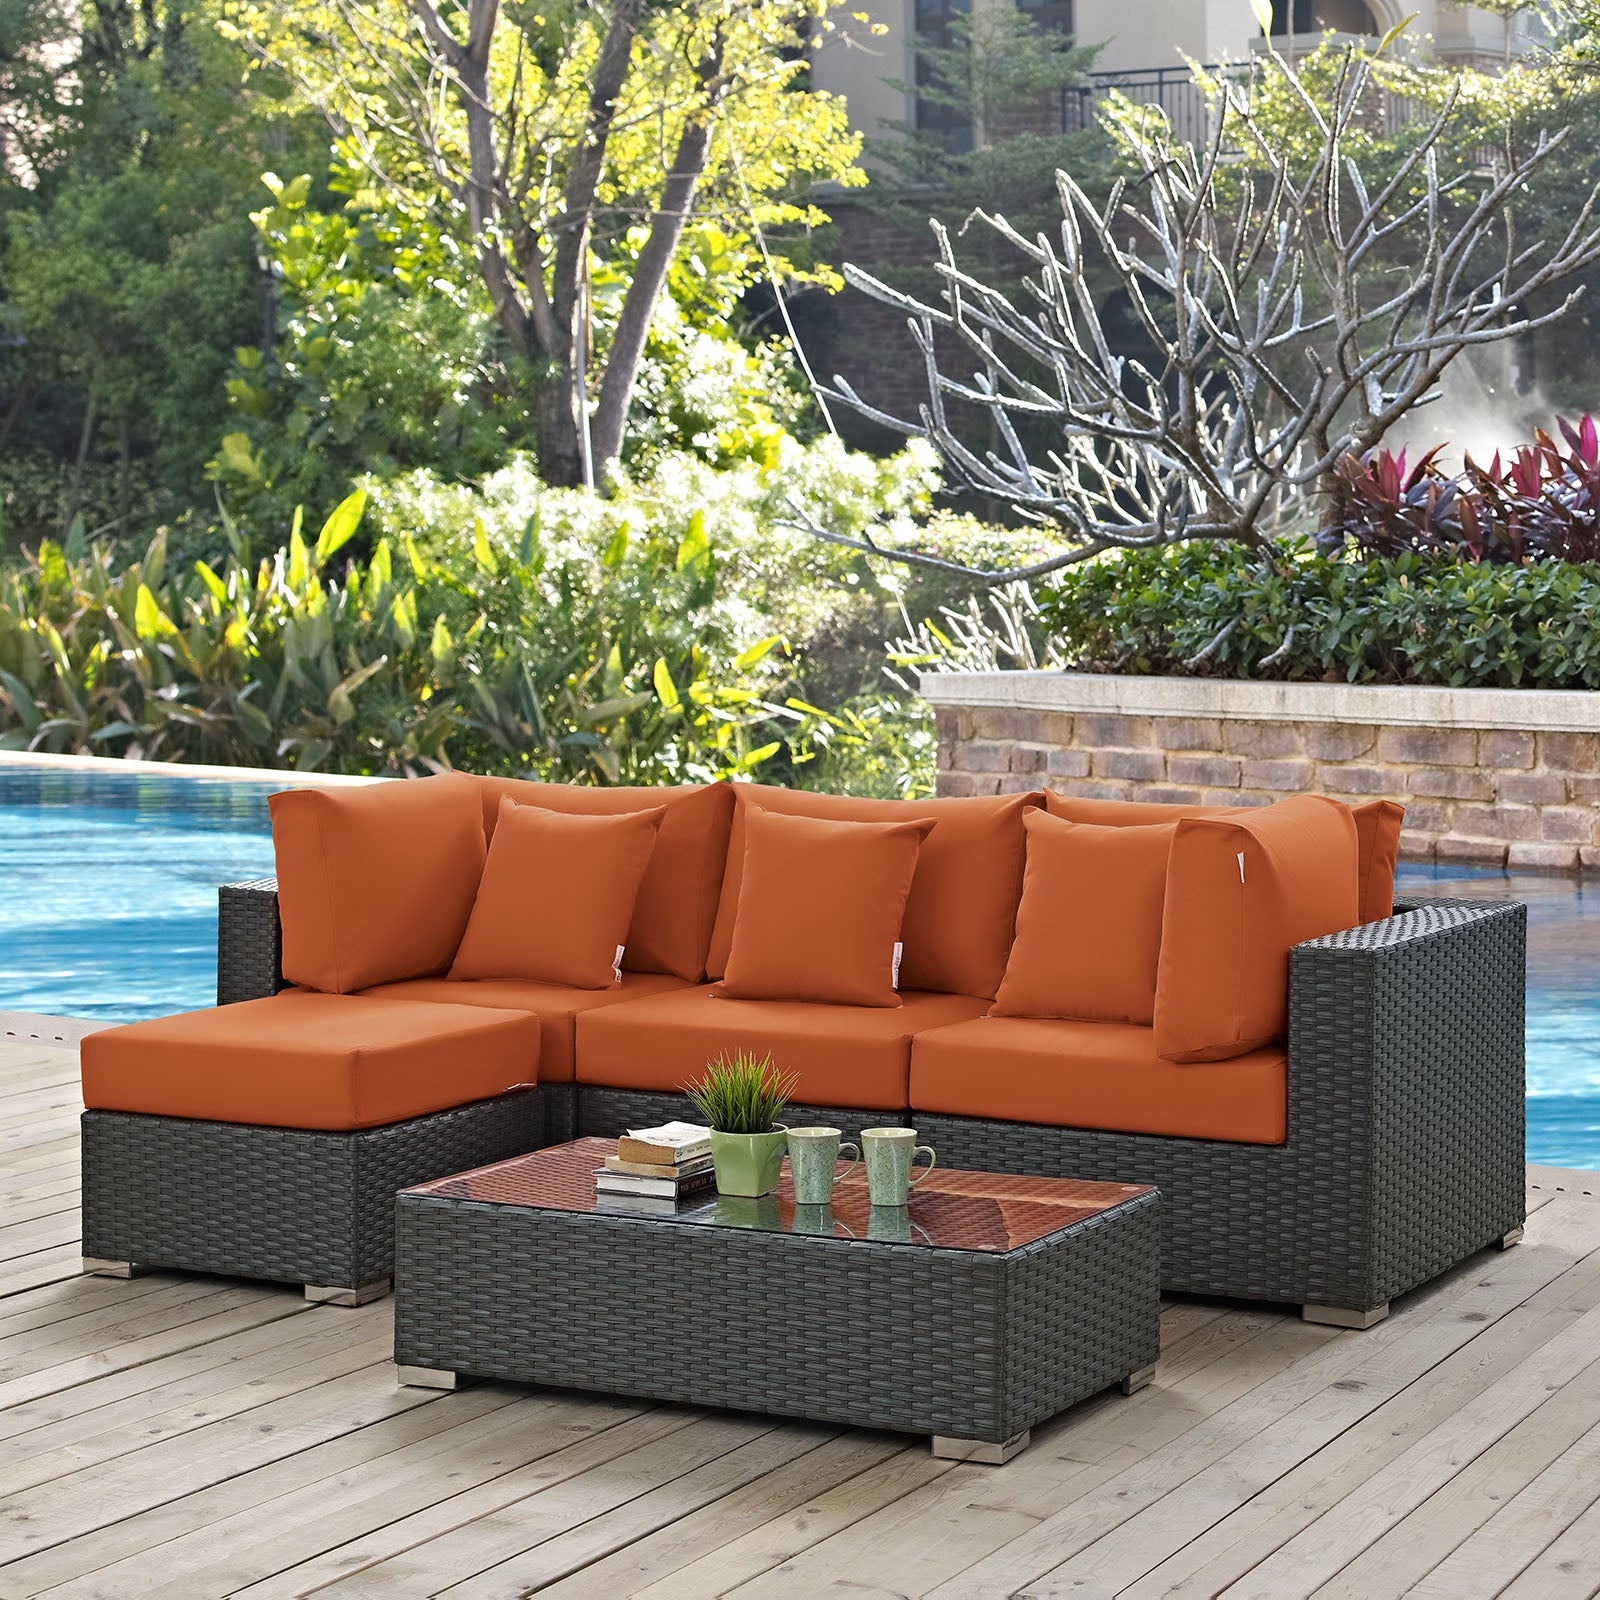 Modway Outdoor Conversation Sets - Sojourn 5 Piece Outdoor Patio Sunbrella Sectional Set Canvas Tuscan